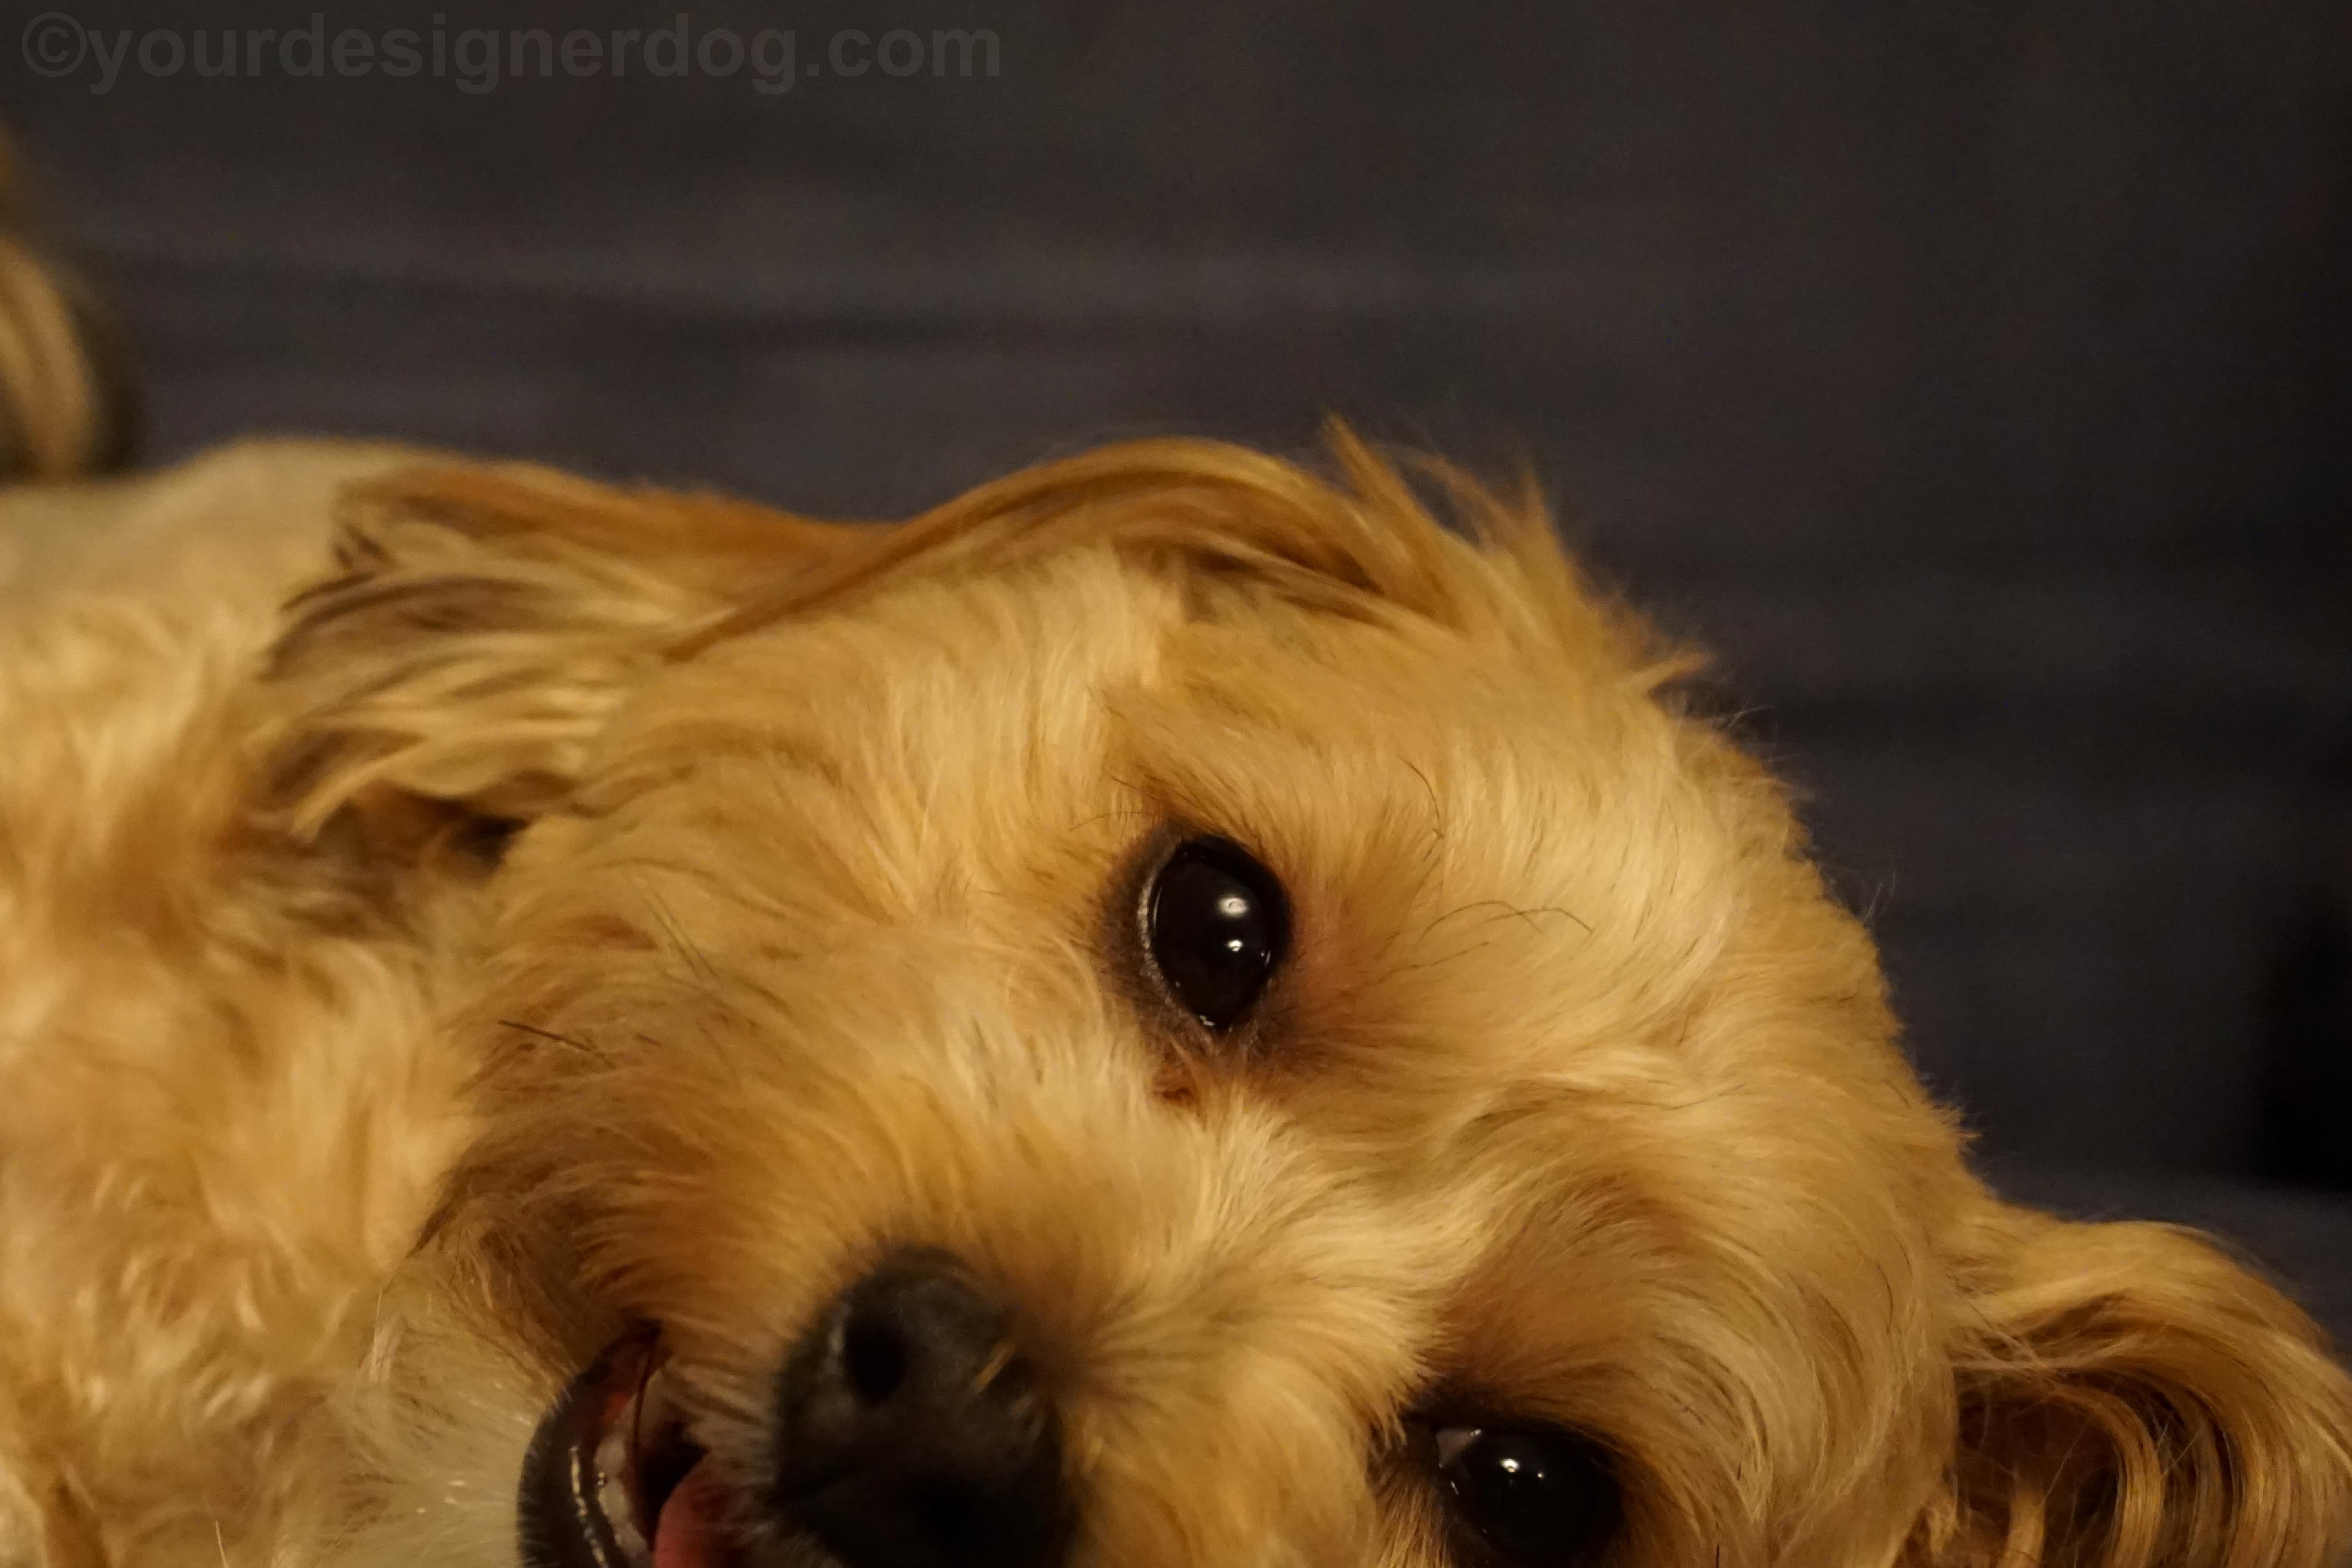 dogs, designer dogs, yorkipoo, yorkie poo, eyes, close up, tongue out